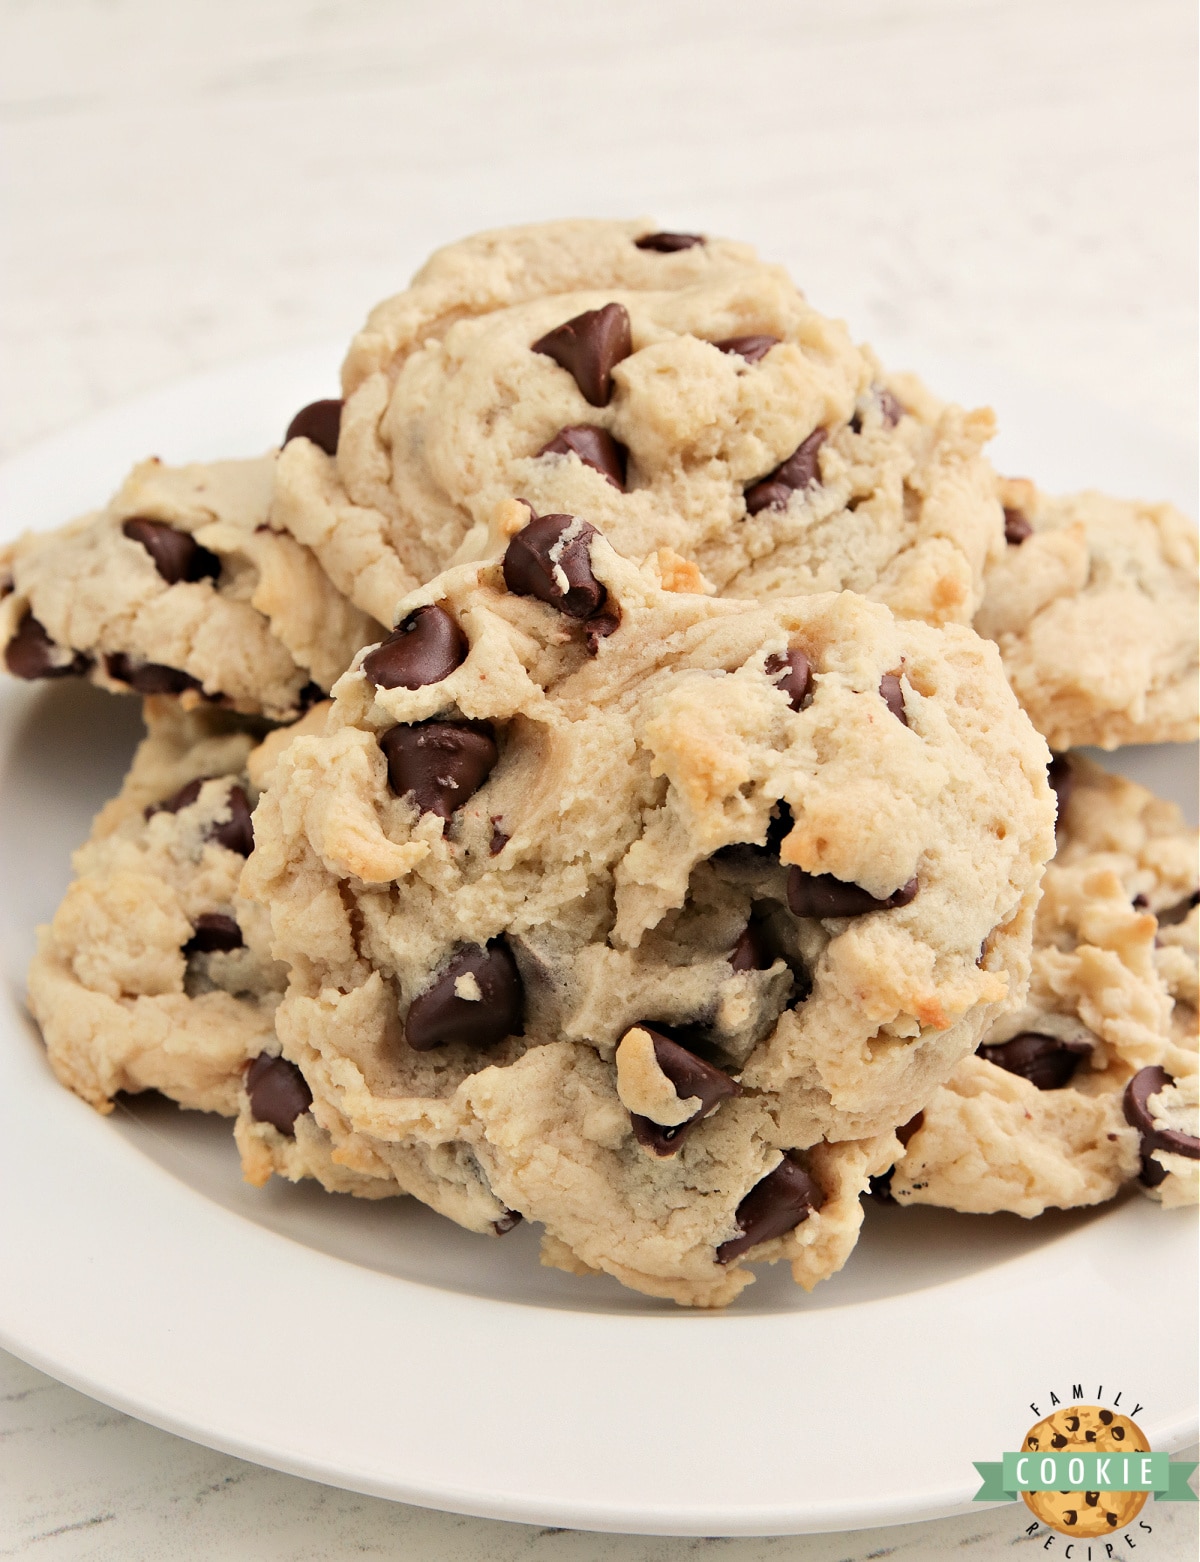 Cream Cheese Chocolate Chip Cookies are so soft, chewy and don't require any eggs. One of my favorite chocolate chip cookie recipes! 